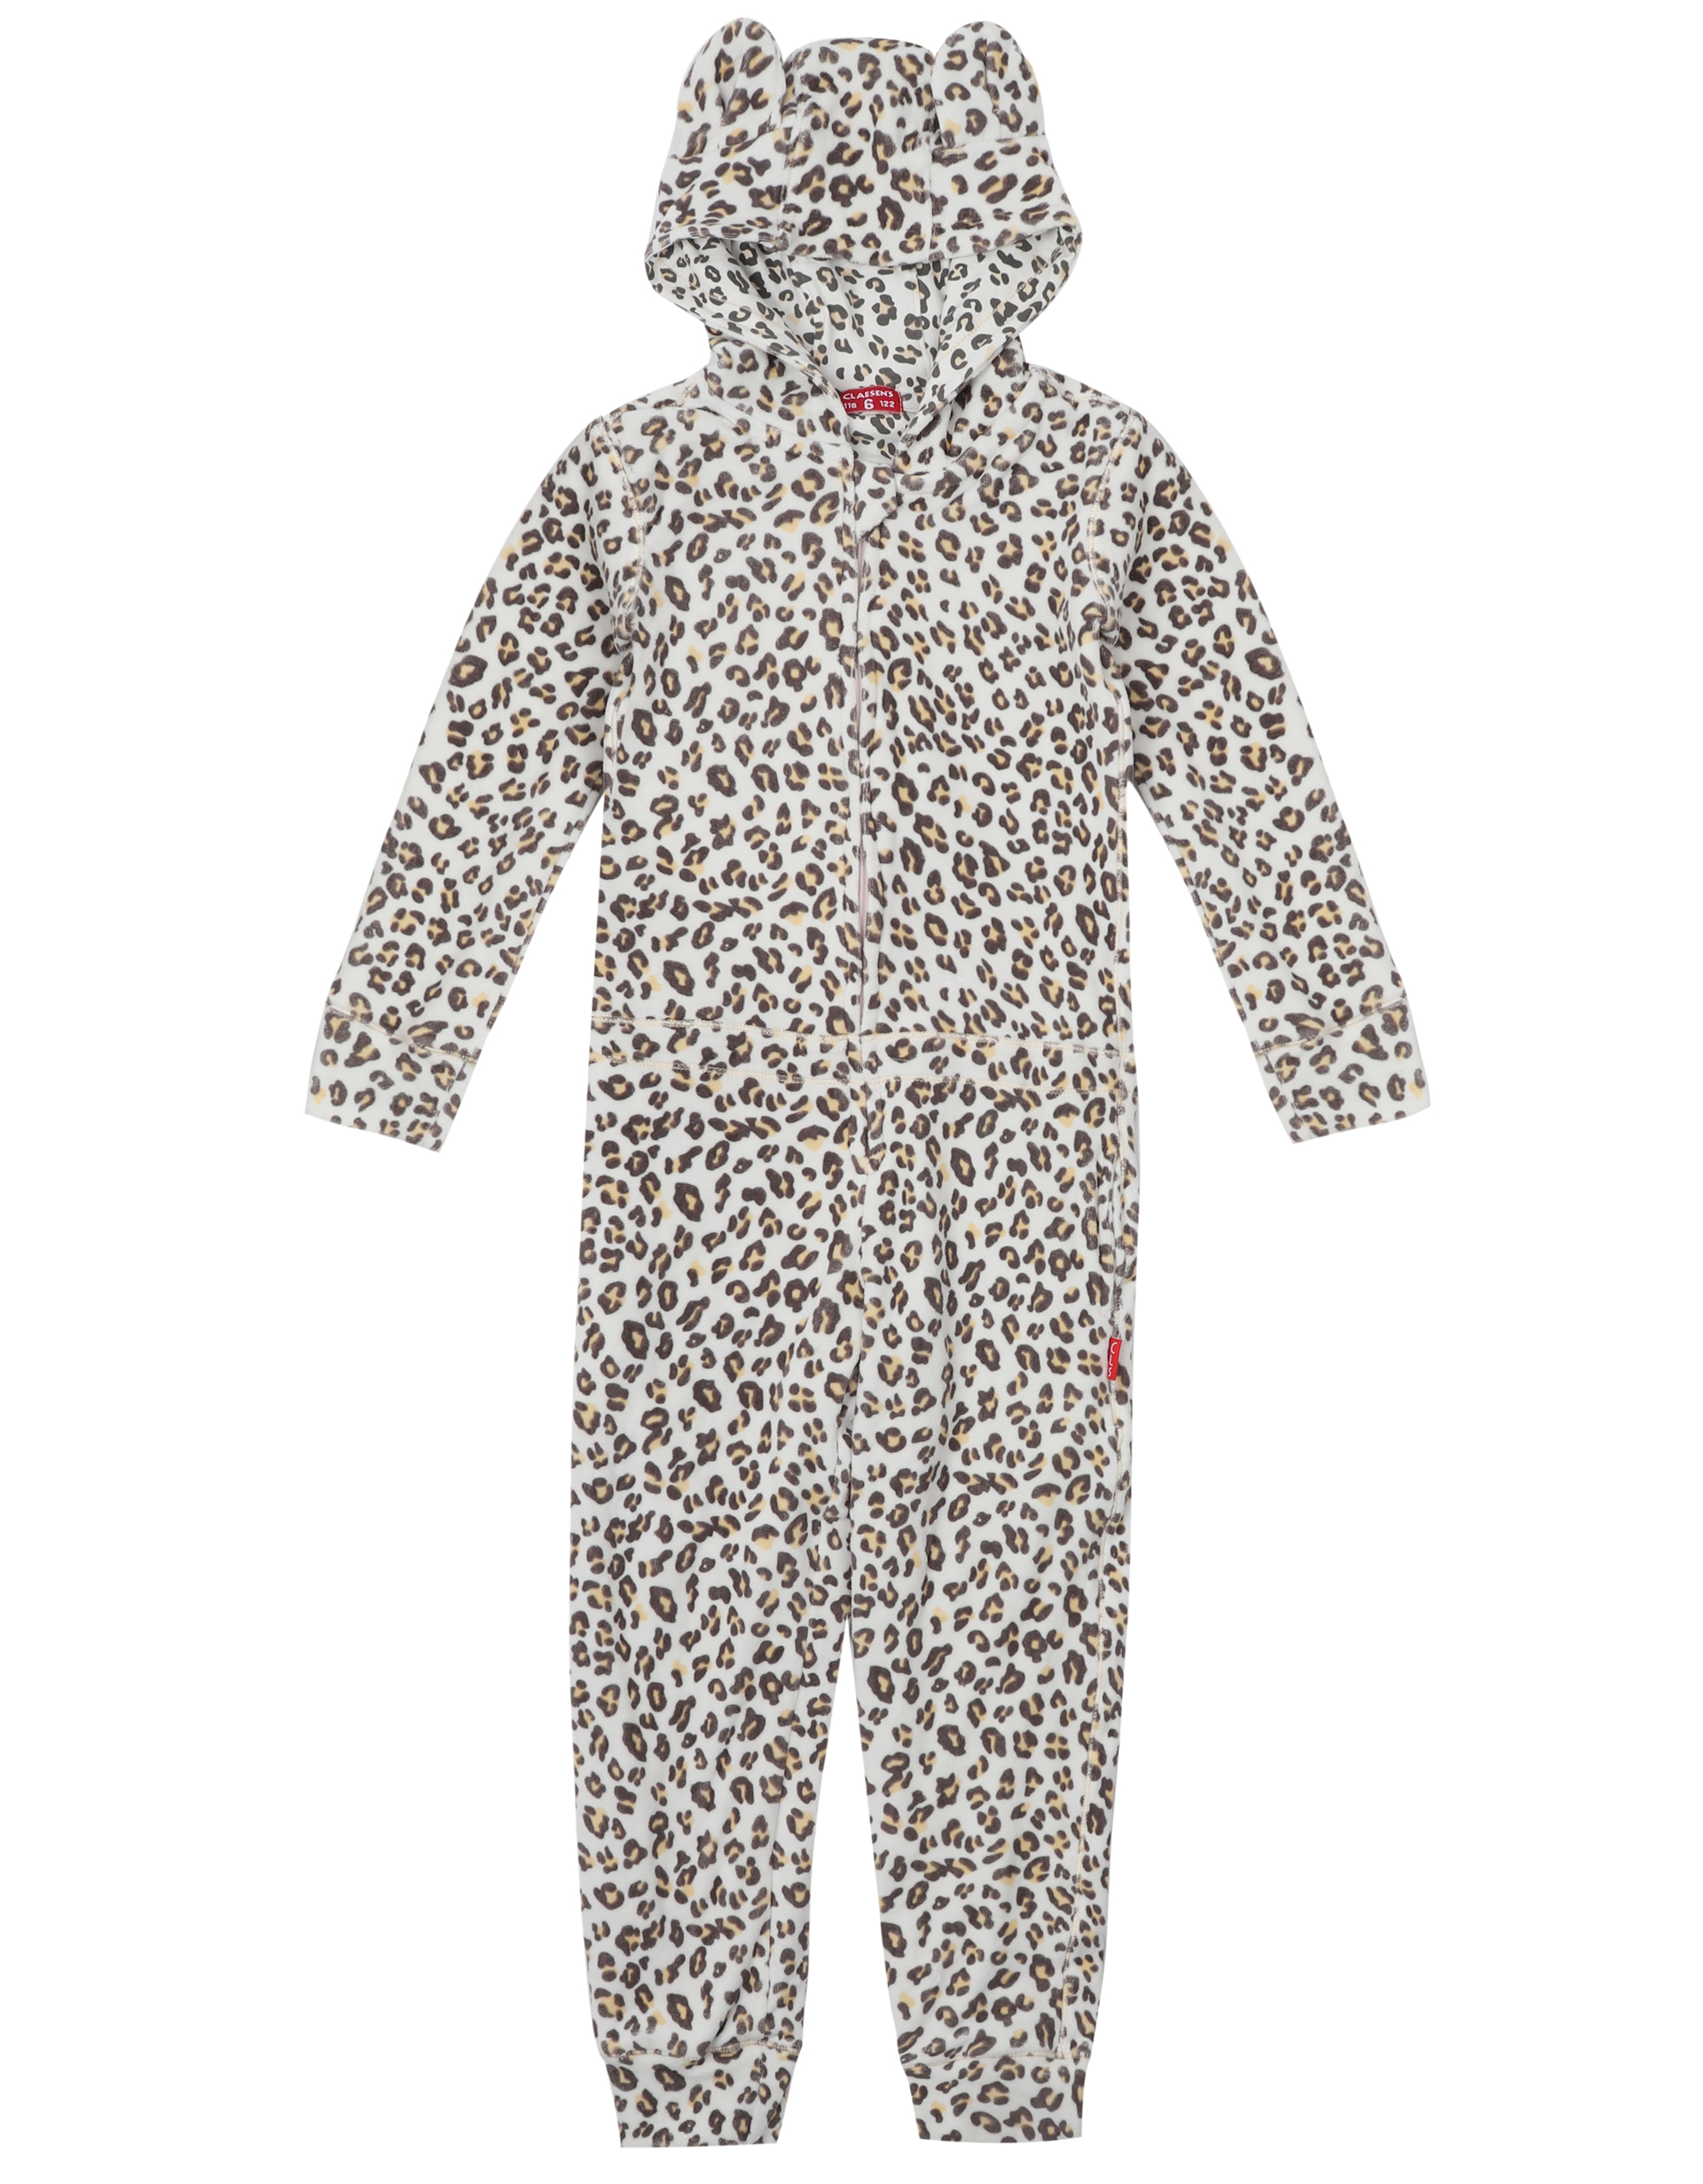 sector Iedereen vlot Onesie Velours Hearts Panther | 4 | 2159422-Hearts Panther-4